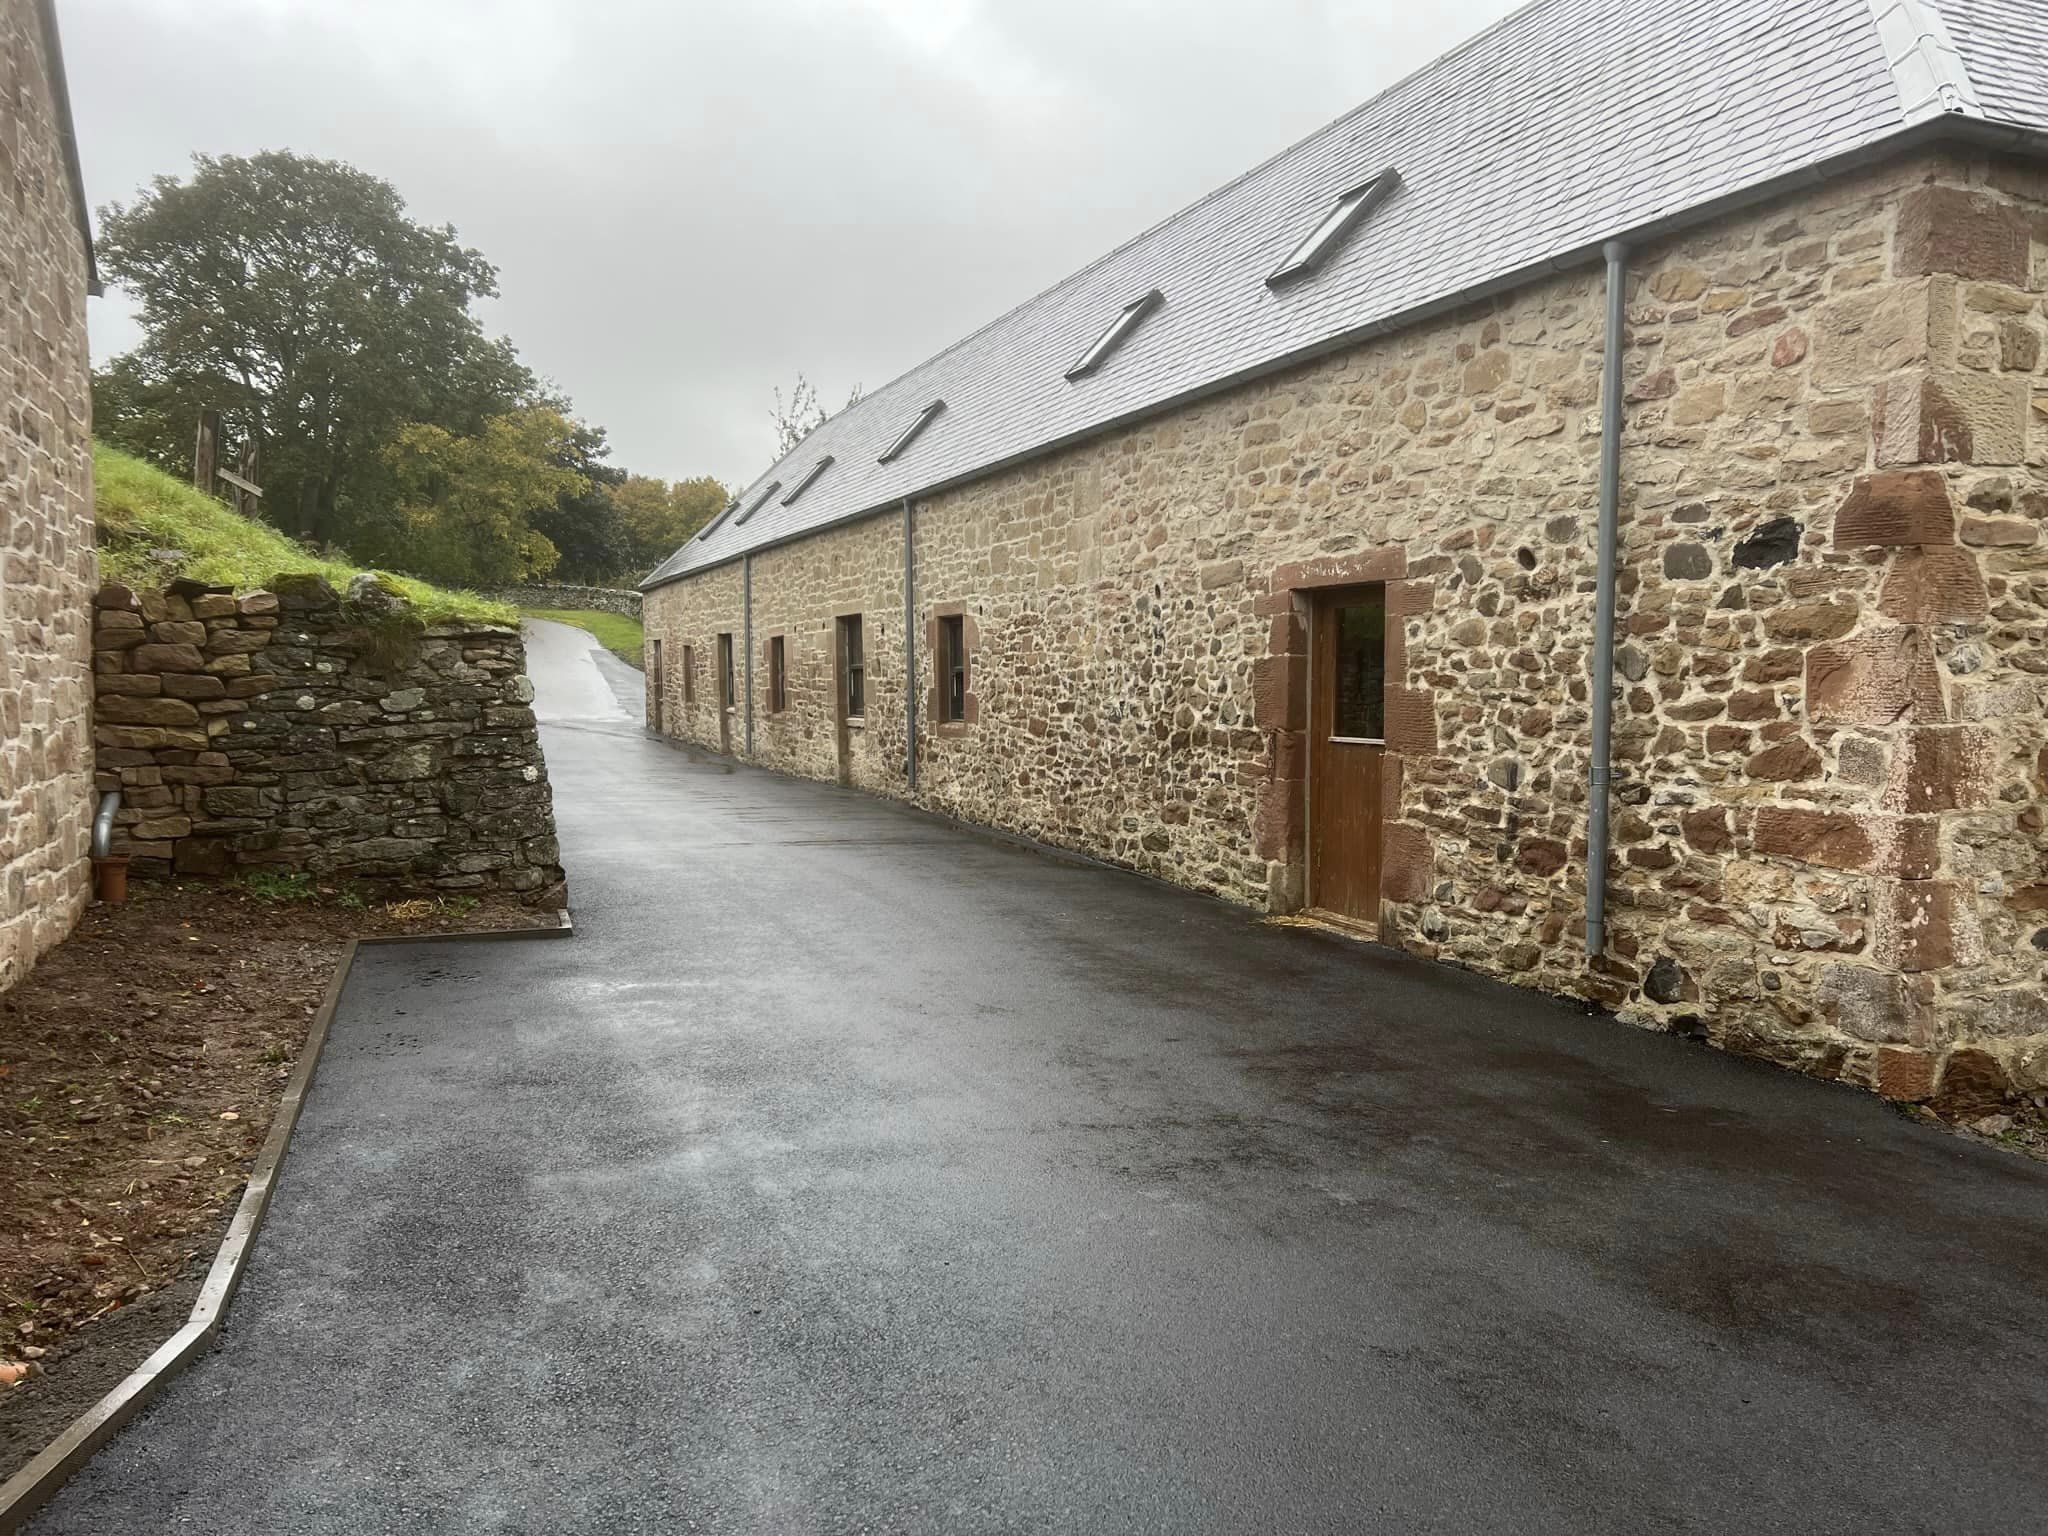 Tarmac Stables, Farm Road Completed Work